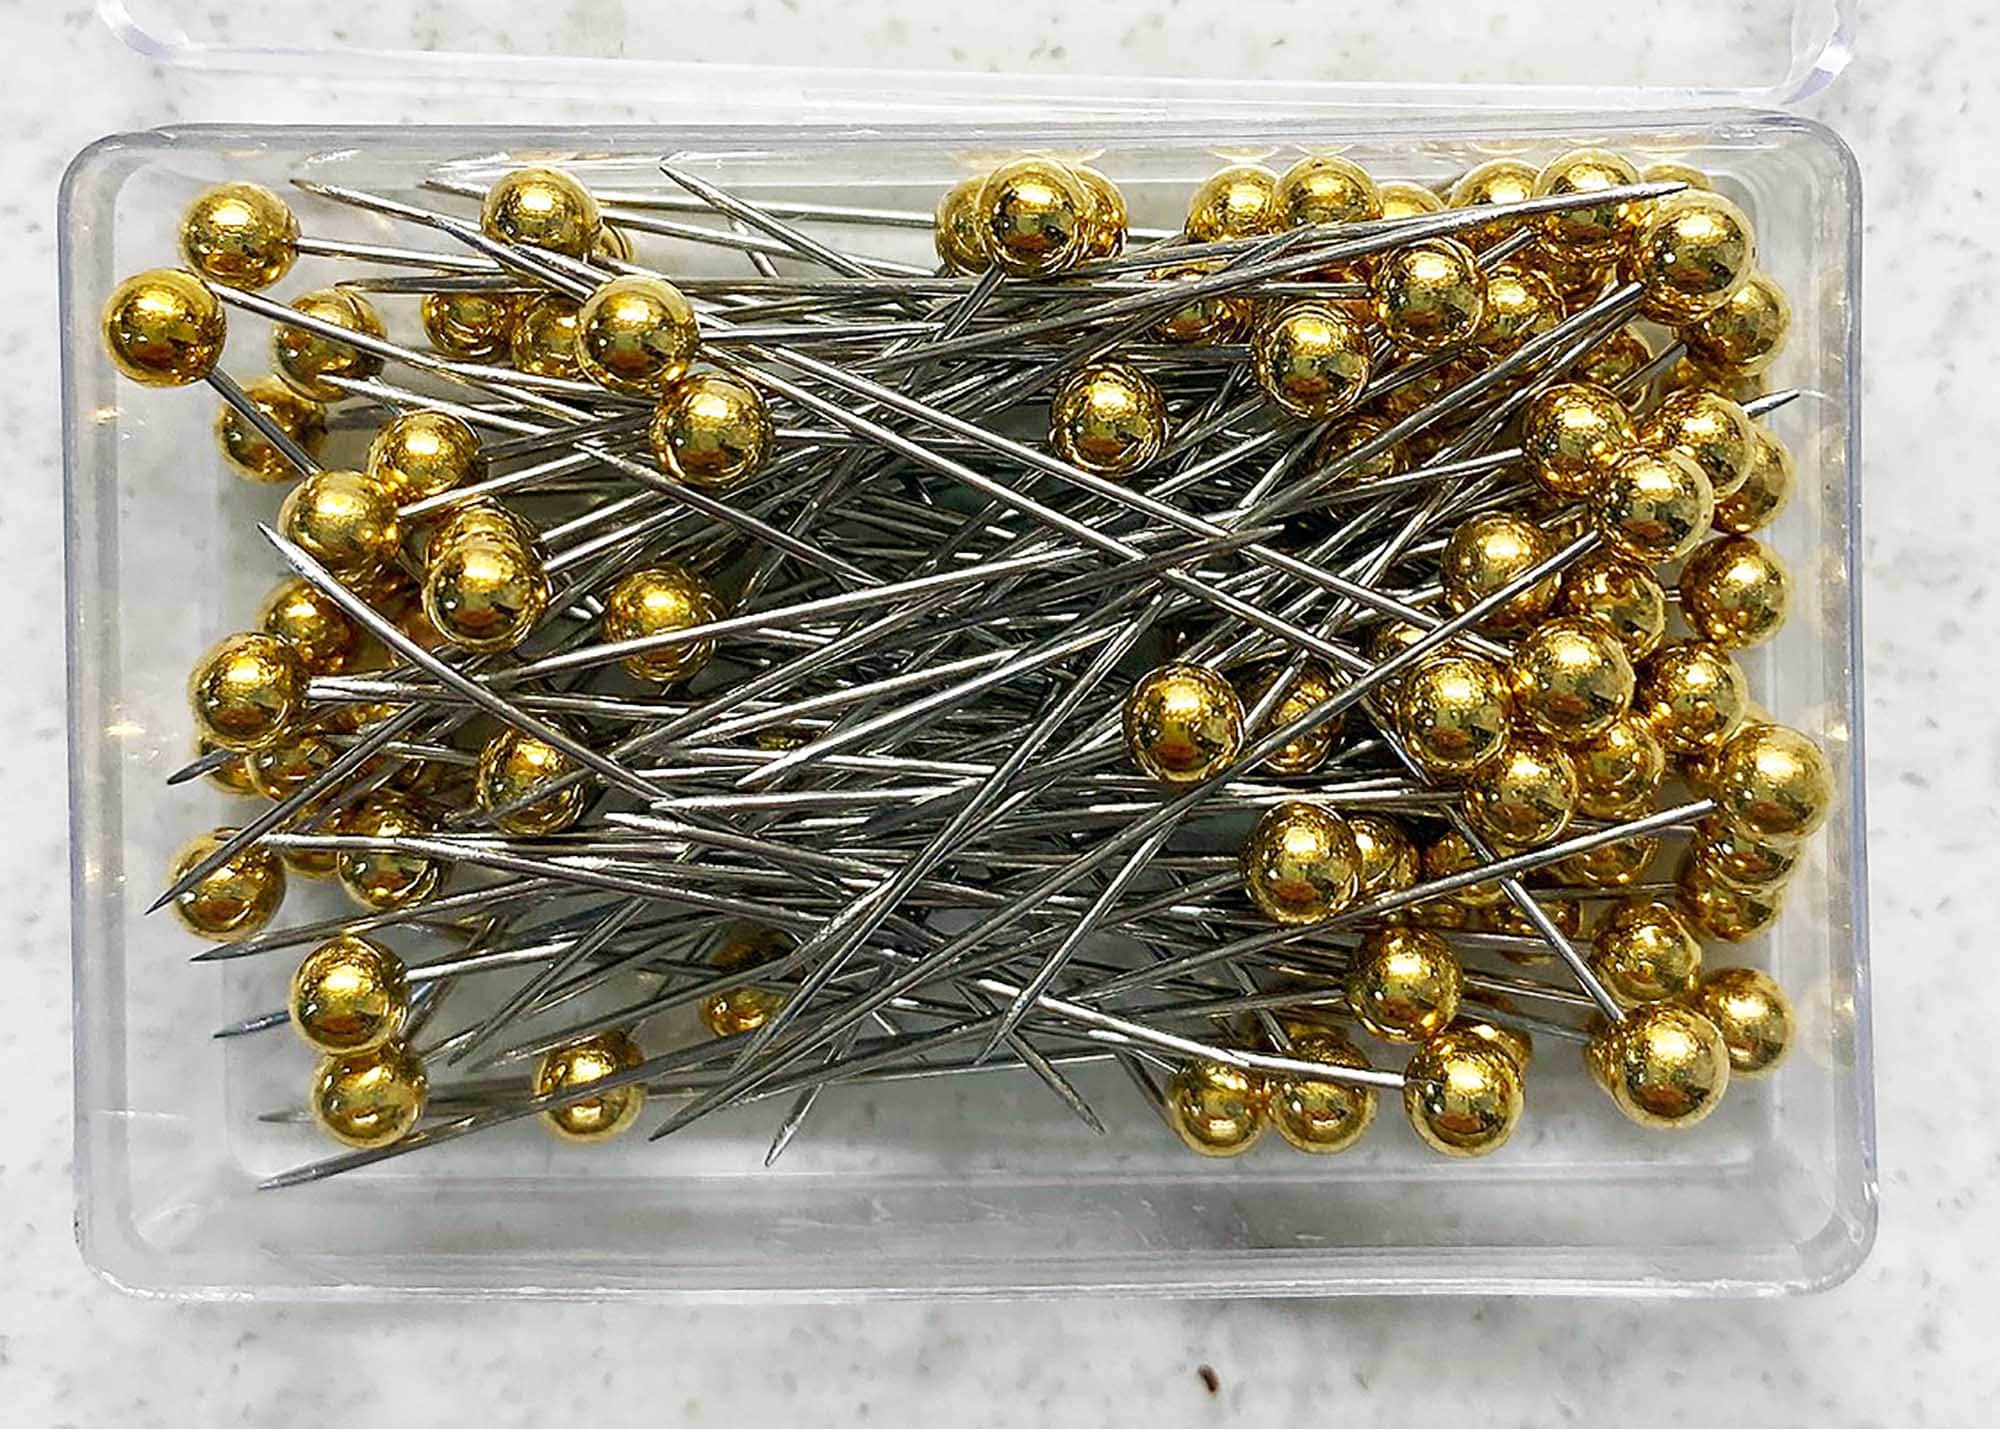 Sequin Pins for Crafts HALF POUND Box Choose Silver 3/4 or Silver 1 Straight  Pins Craft Pins Free USA Shipping 